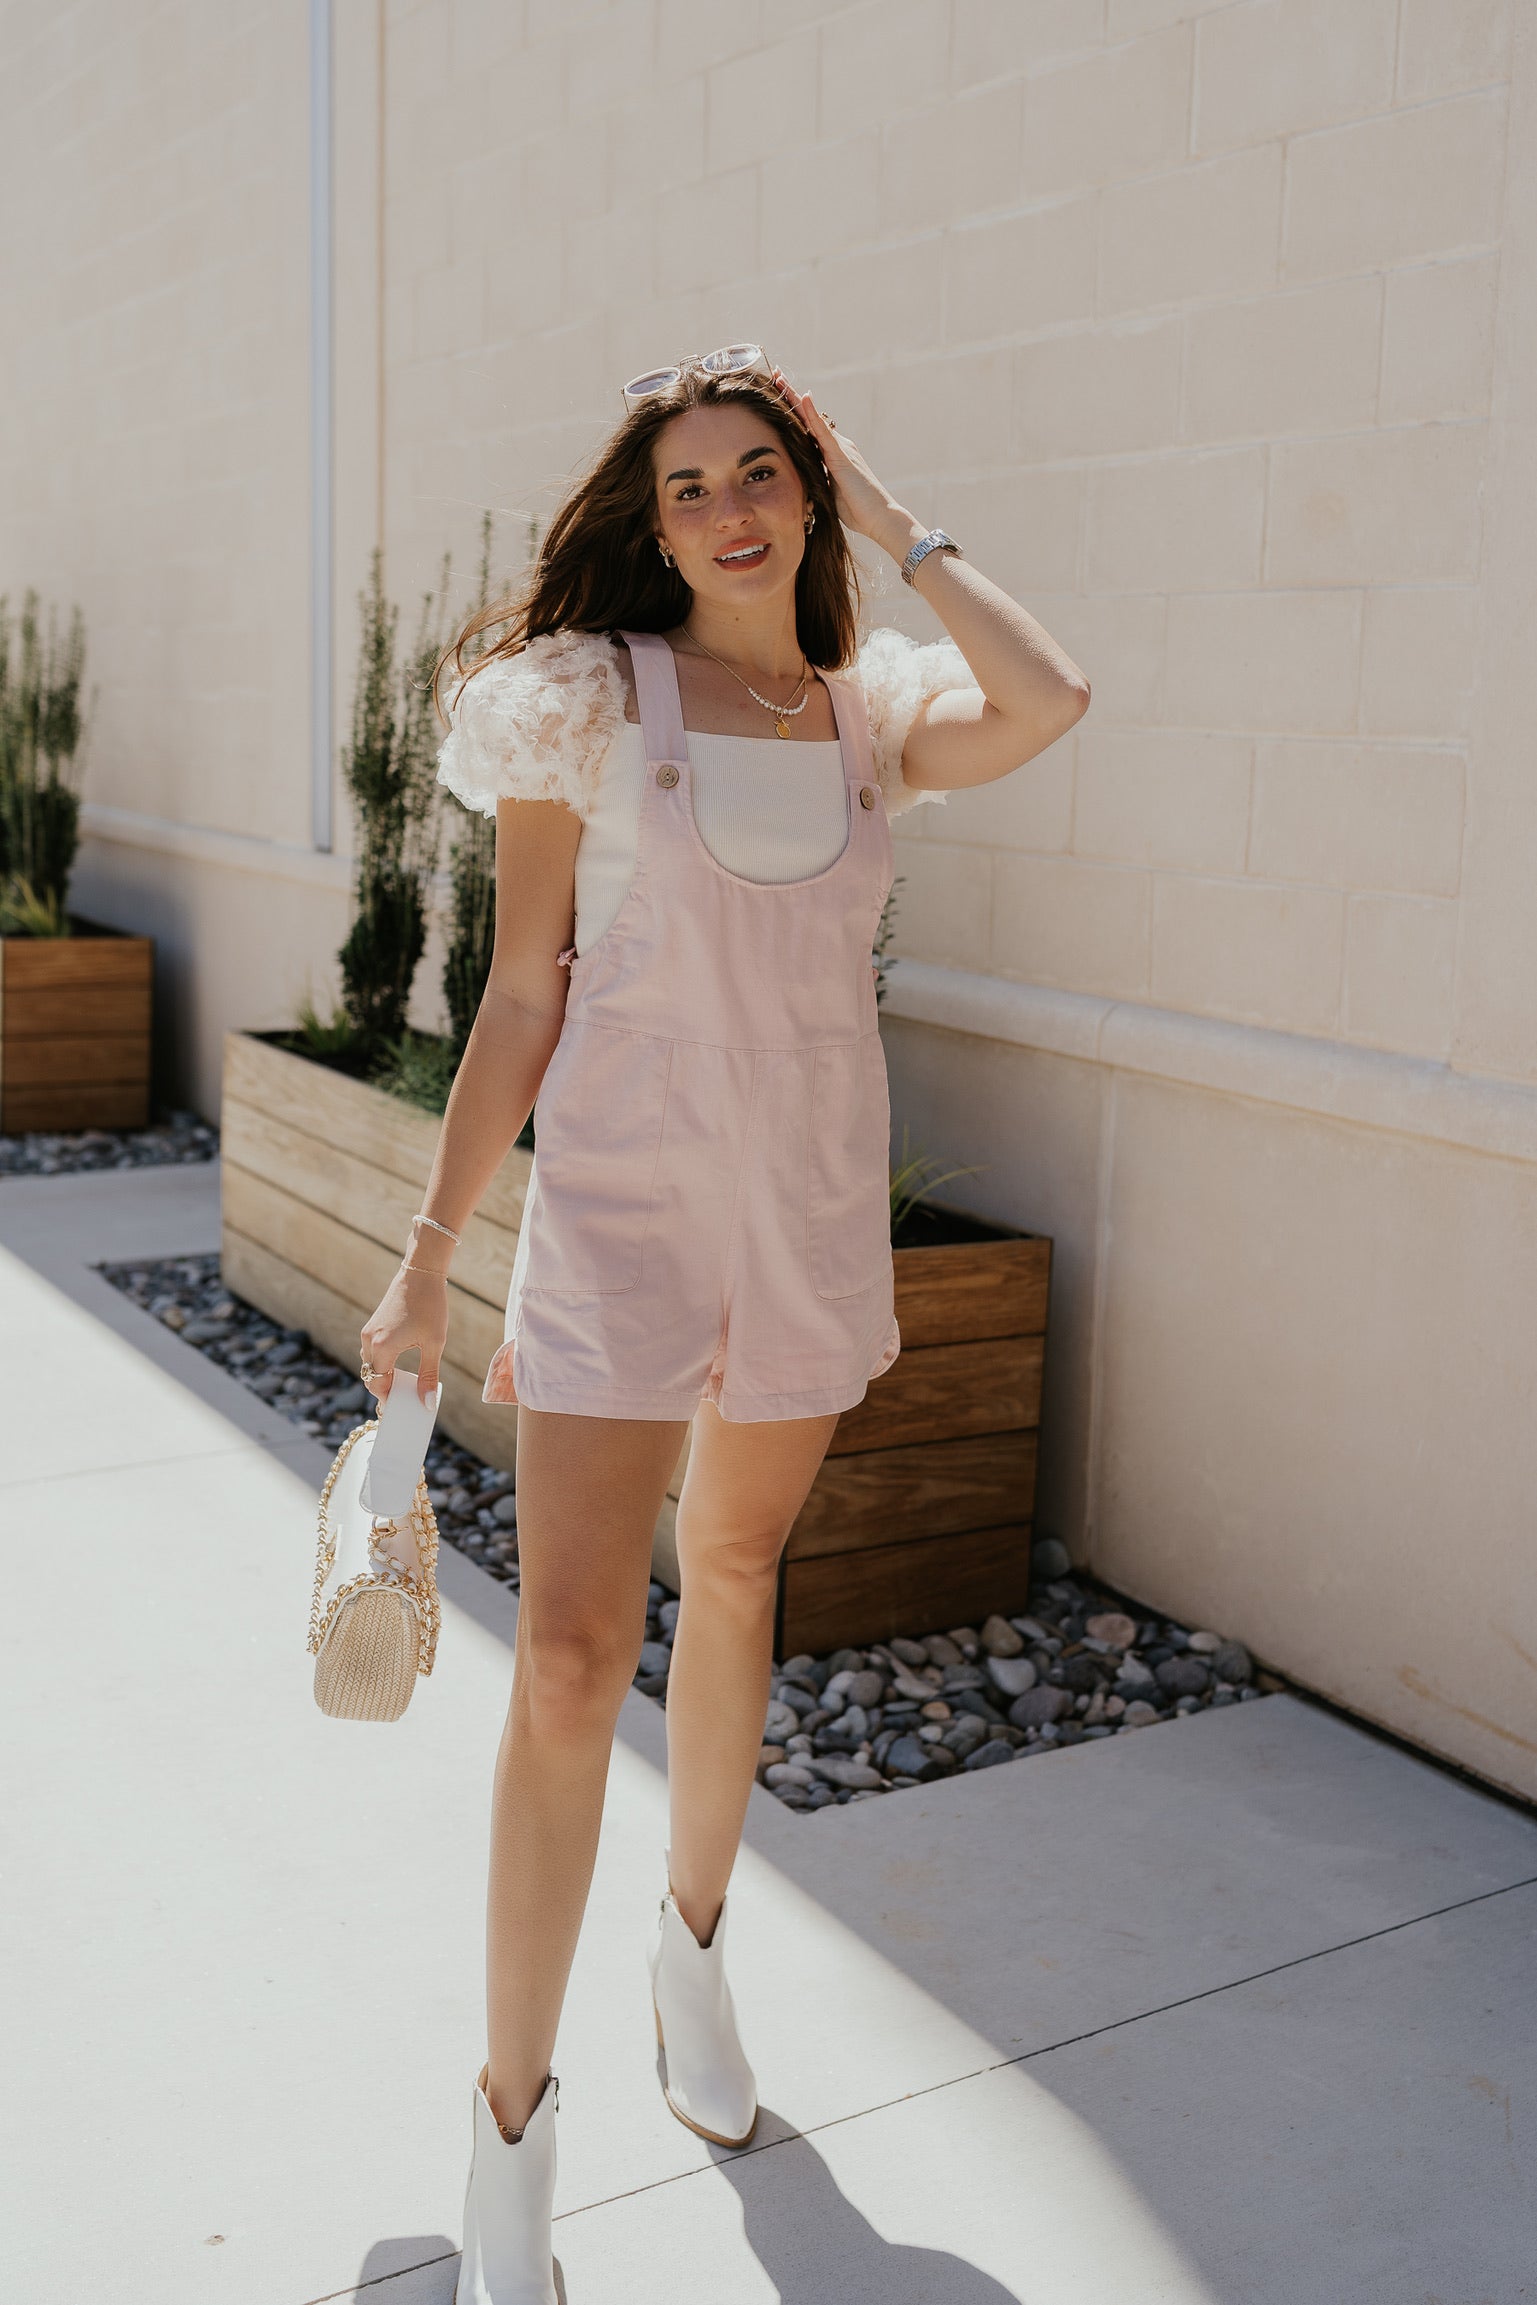 image of model wearing a pink romper with white puffy sleeve top, white button links to rompers & reads "shop rompers"